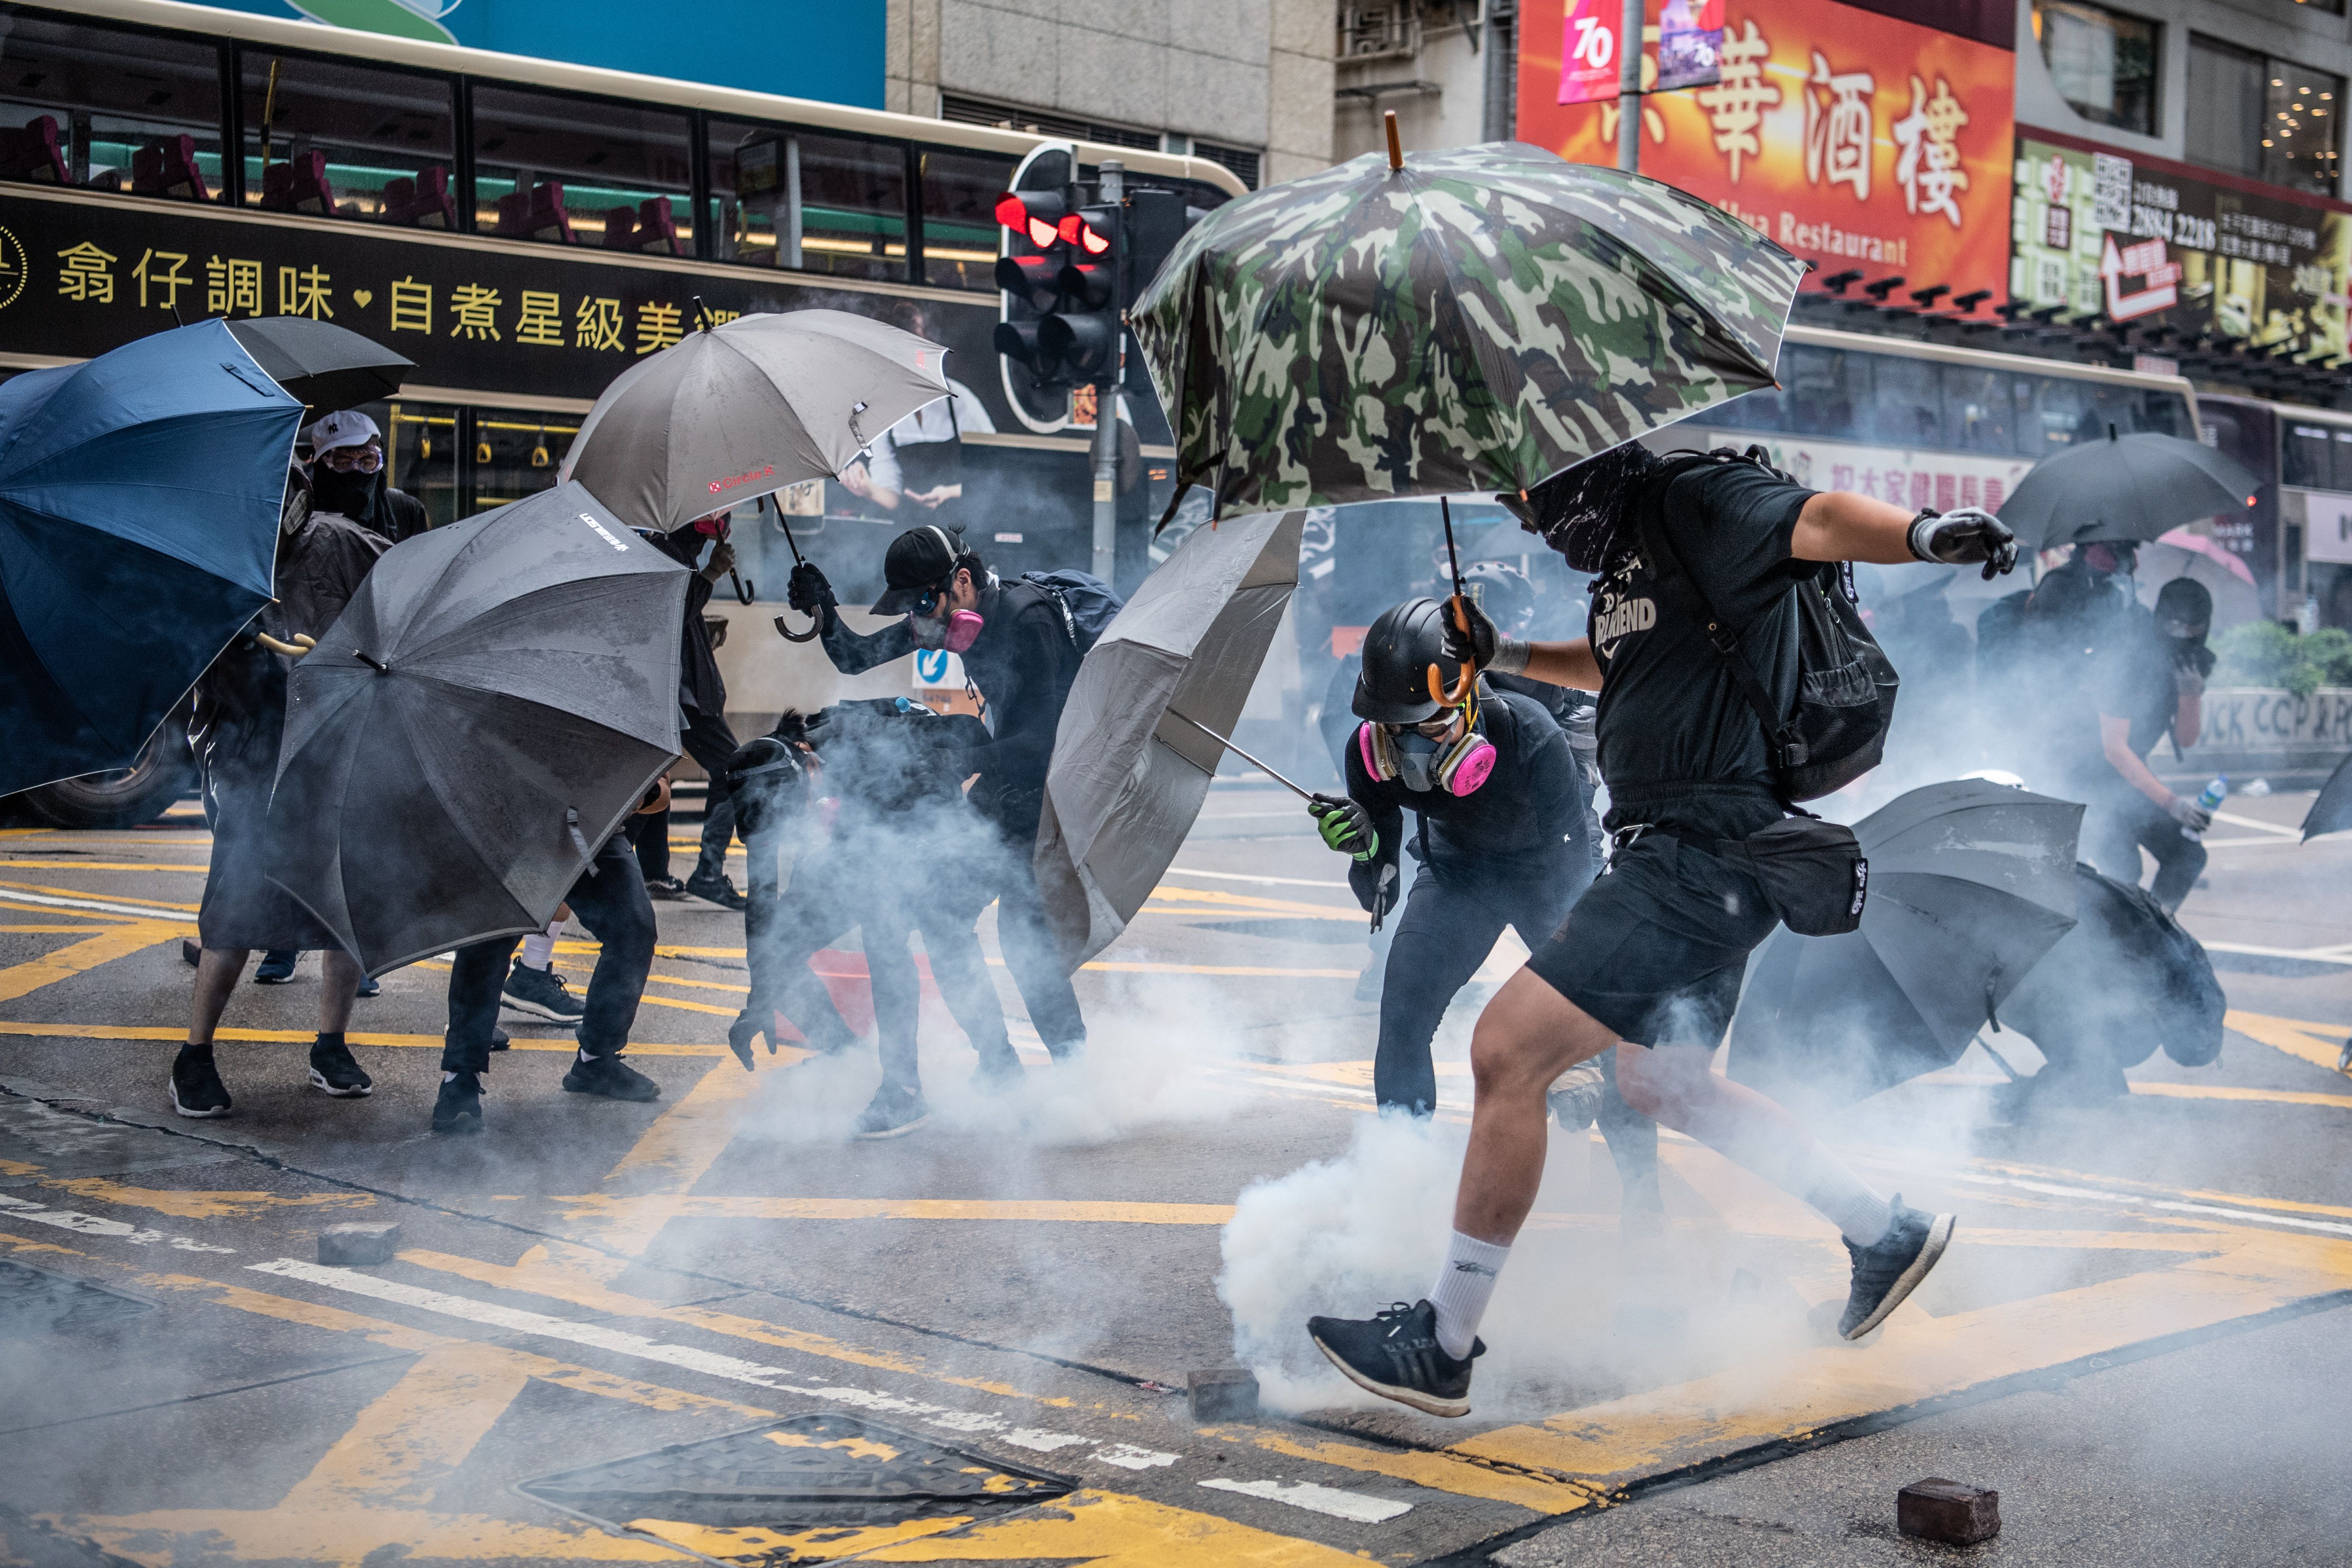 Protesters clash with police during a protest in Kowloon